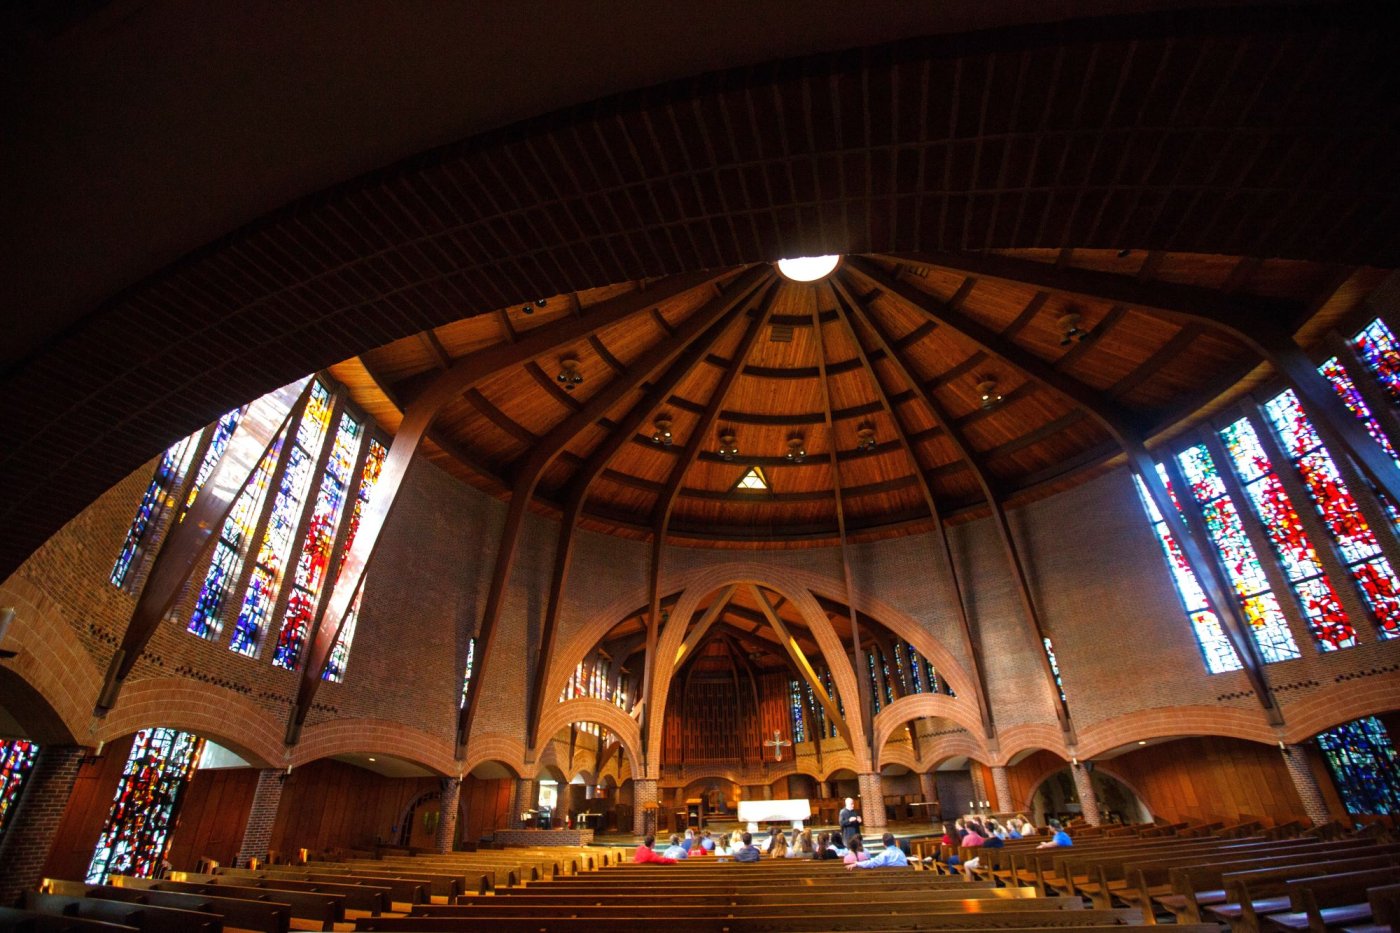 Photo of Abbey Church interior showing vaulted timber roof of cylindrical space, stained glass windows on the walls to either side, and brick arches